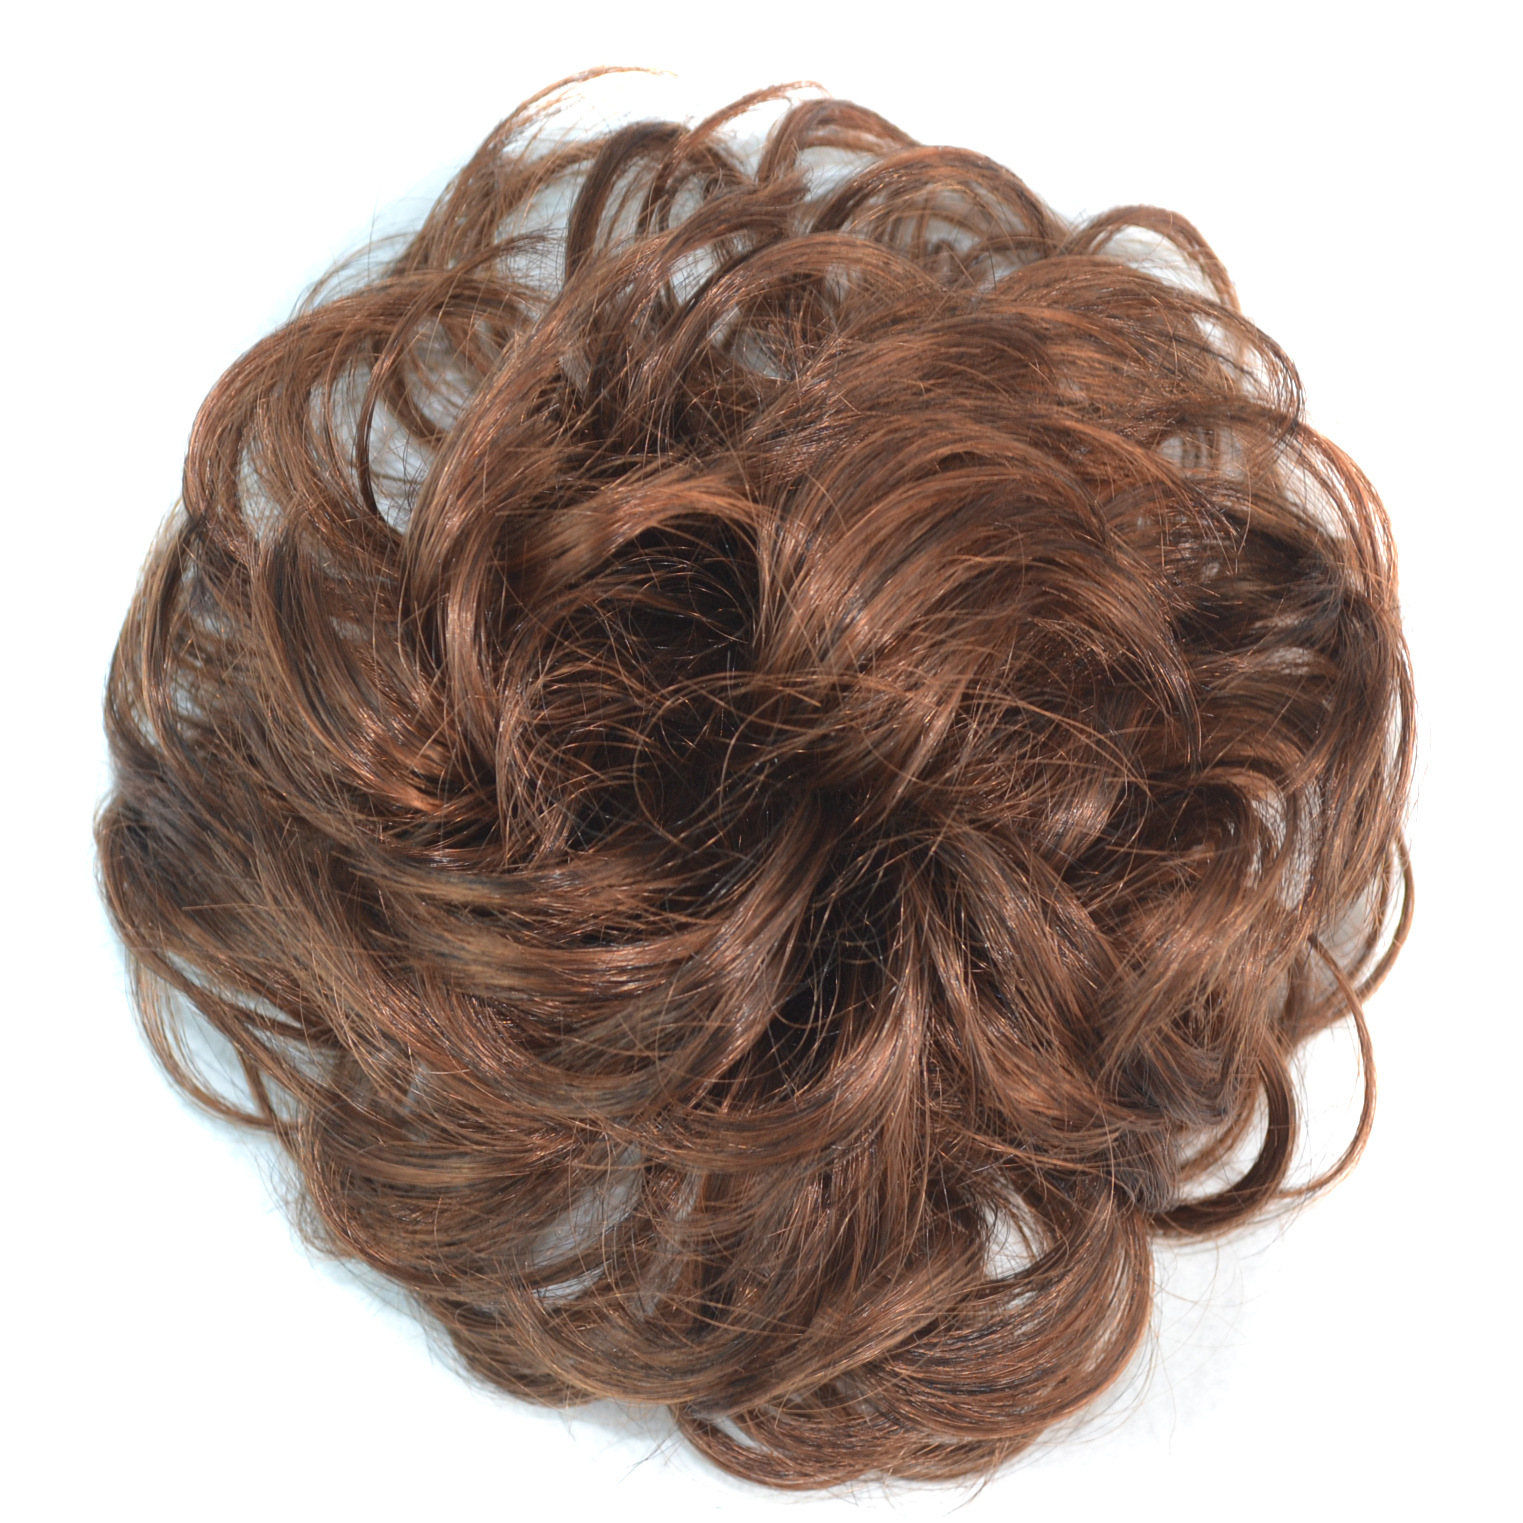 Wig Bun Bridal Hair Bag Female Tent Stopper Style Fluffy Curl Bud-like Hair Style Ancient Costume Wig Hair Bag Messy Hair Ring